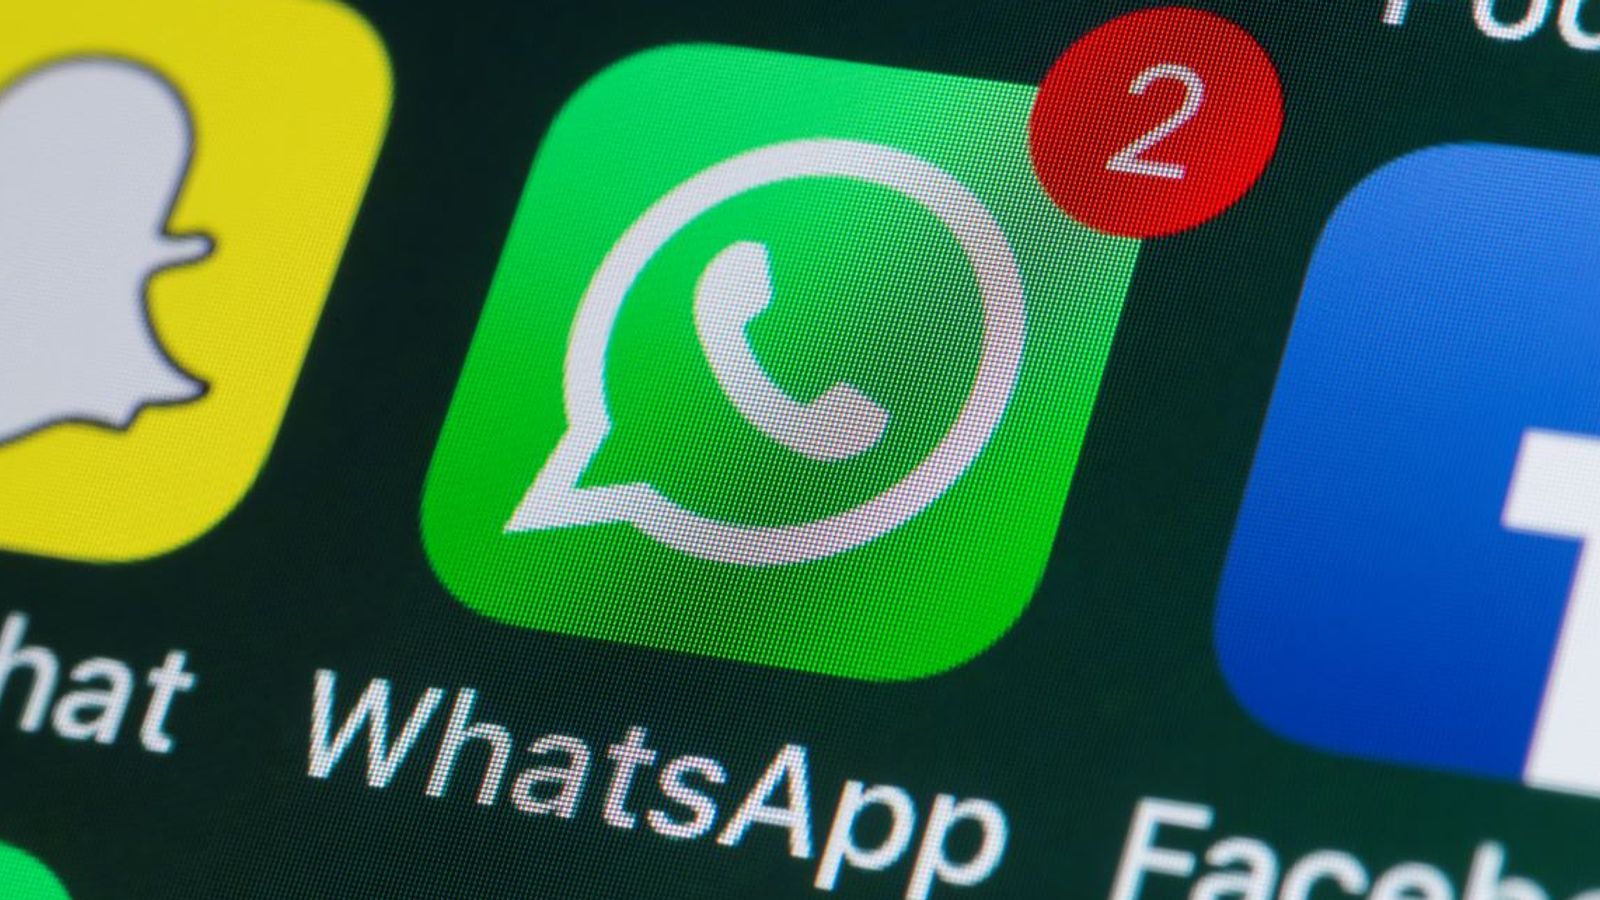 • WhatsApp remains the top digital channel for conversational marketing in absolute numbers, driven by new features that enable customers to start and complete a purchase in a single WhatsApp chat window.